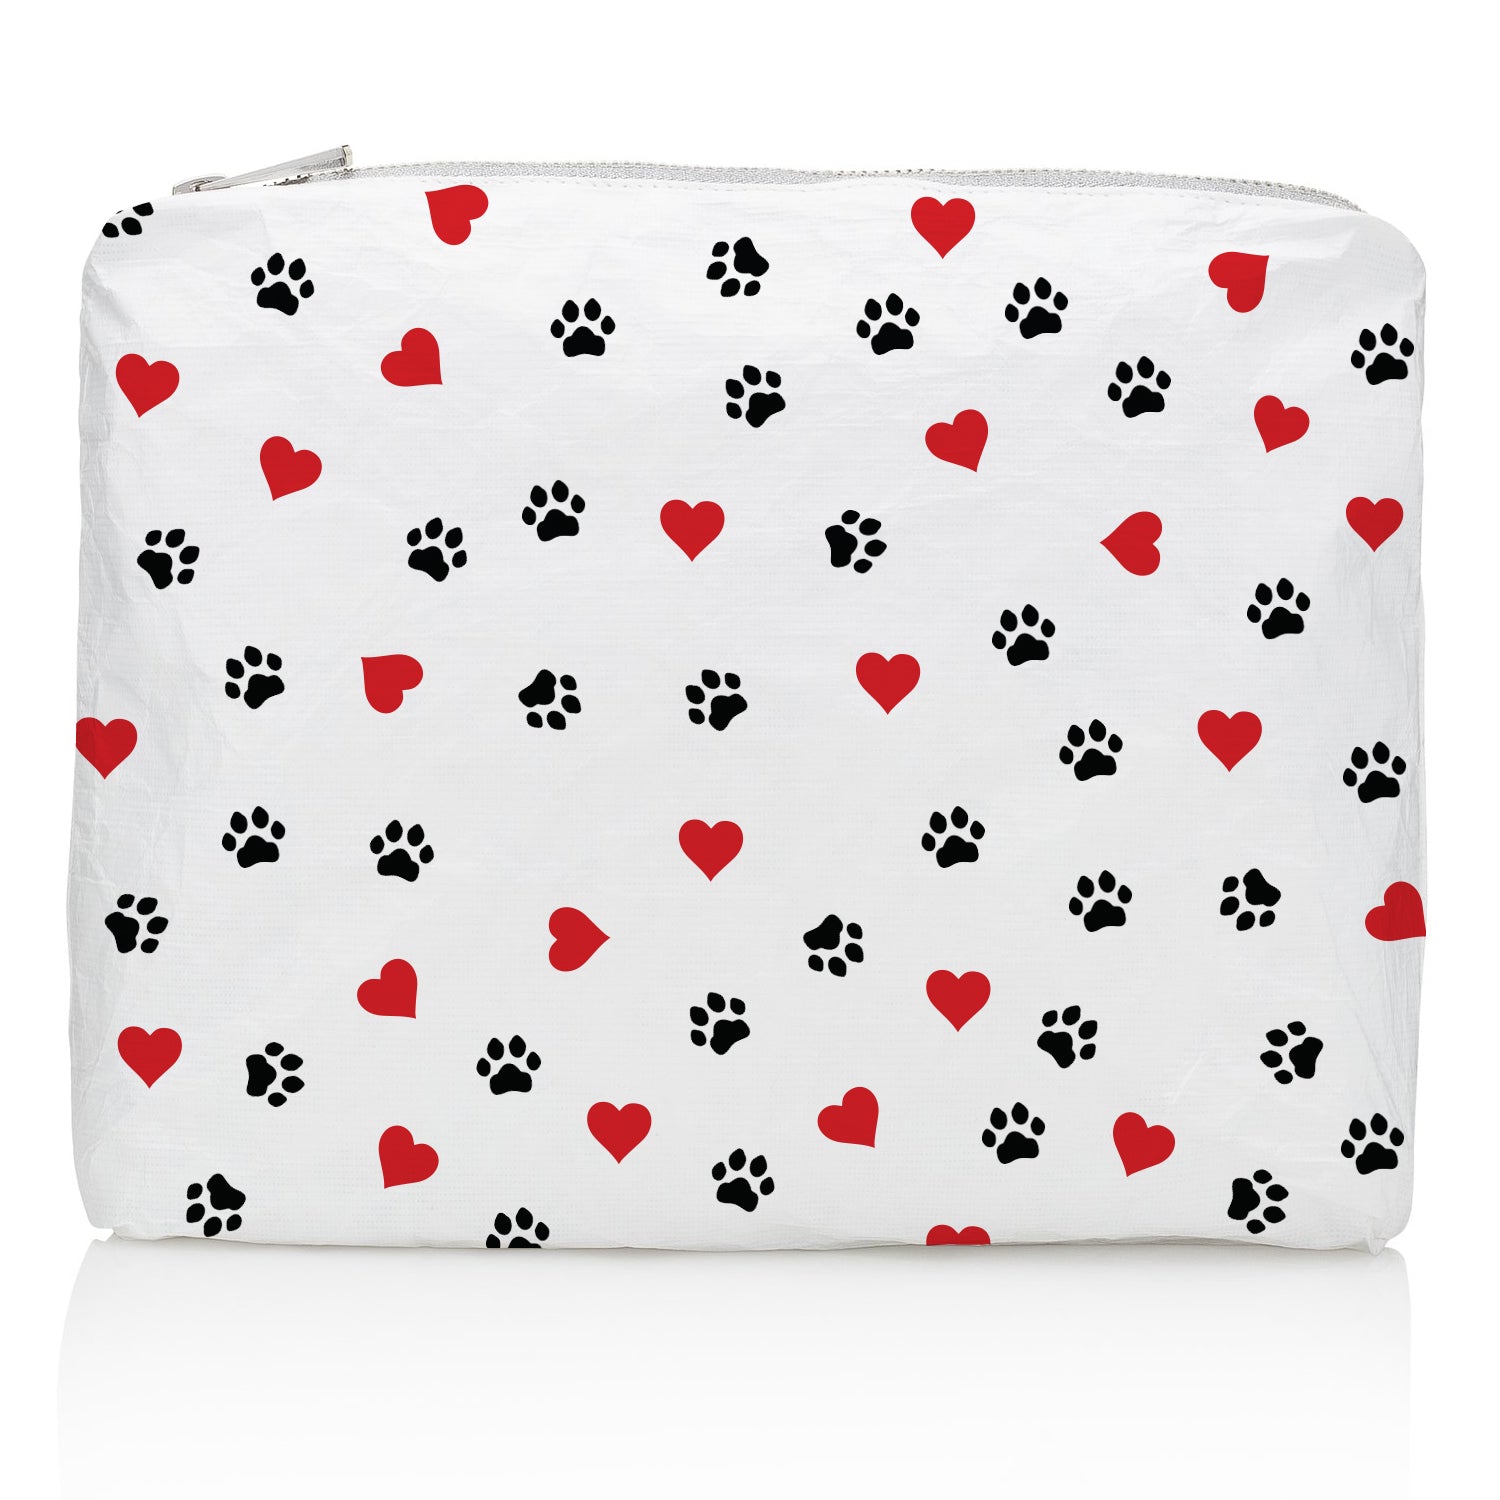 Medium zipper pack with paw prints and hearts